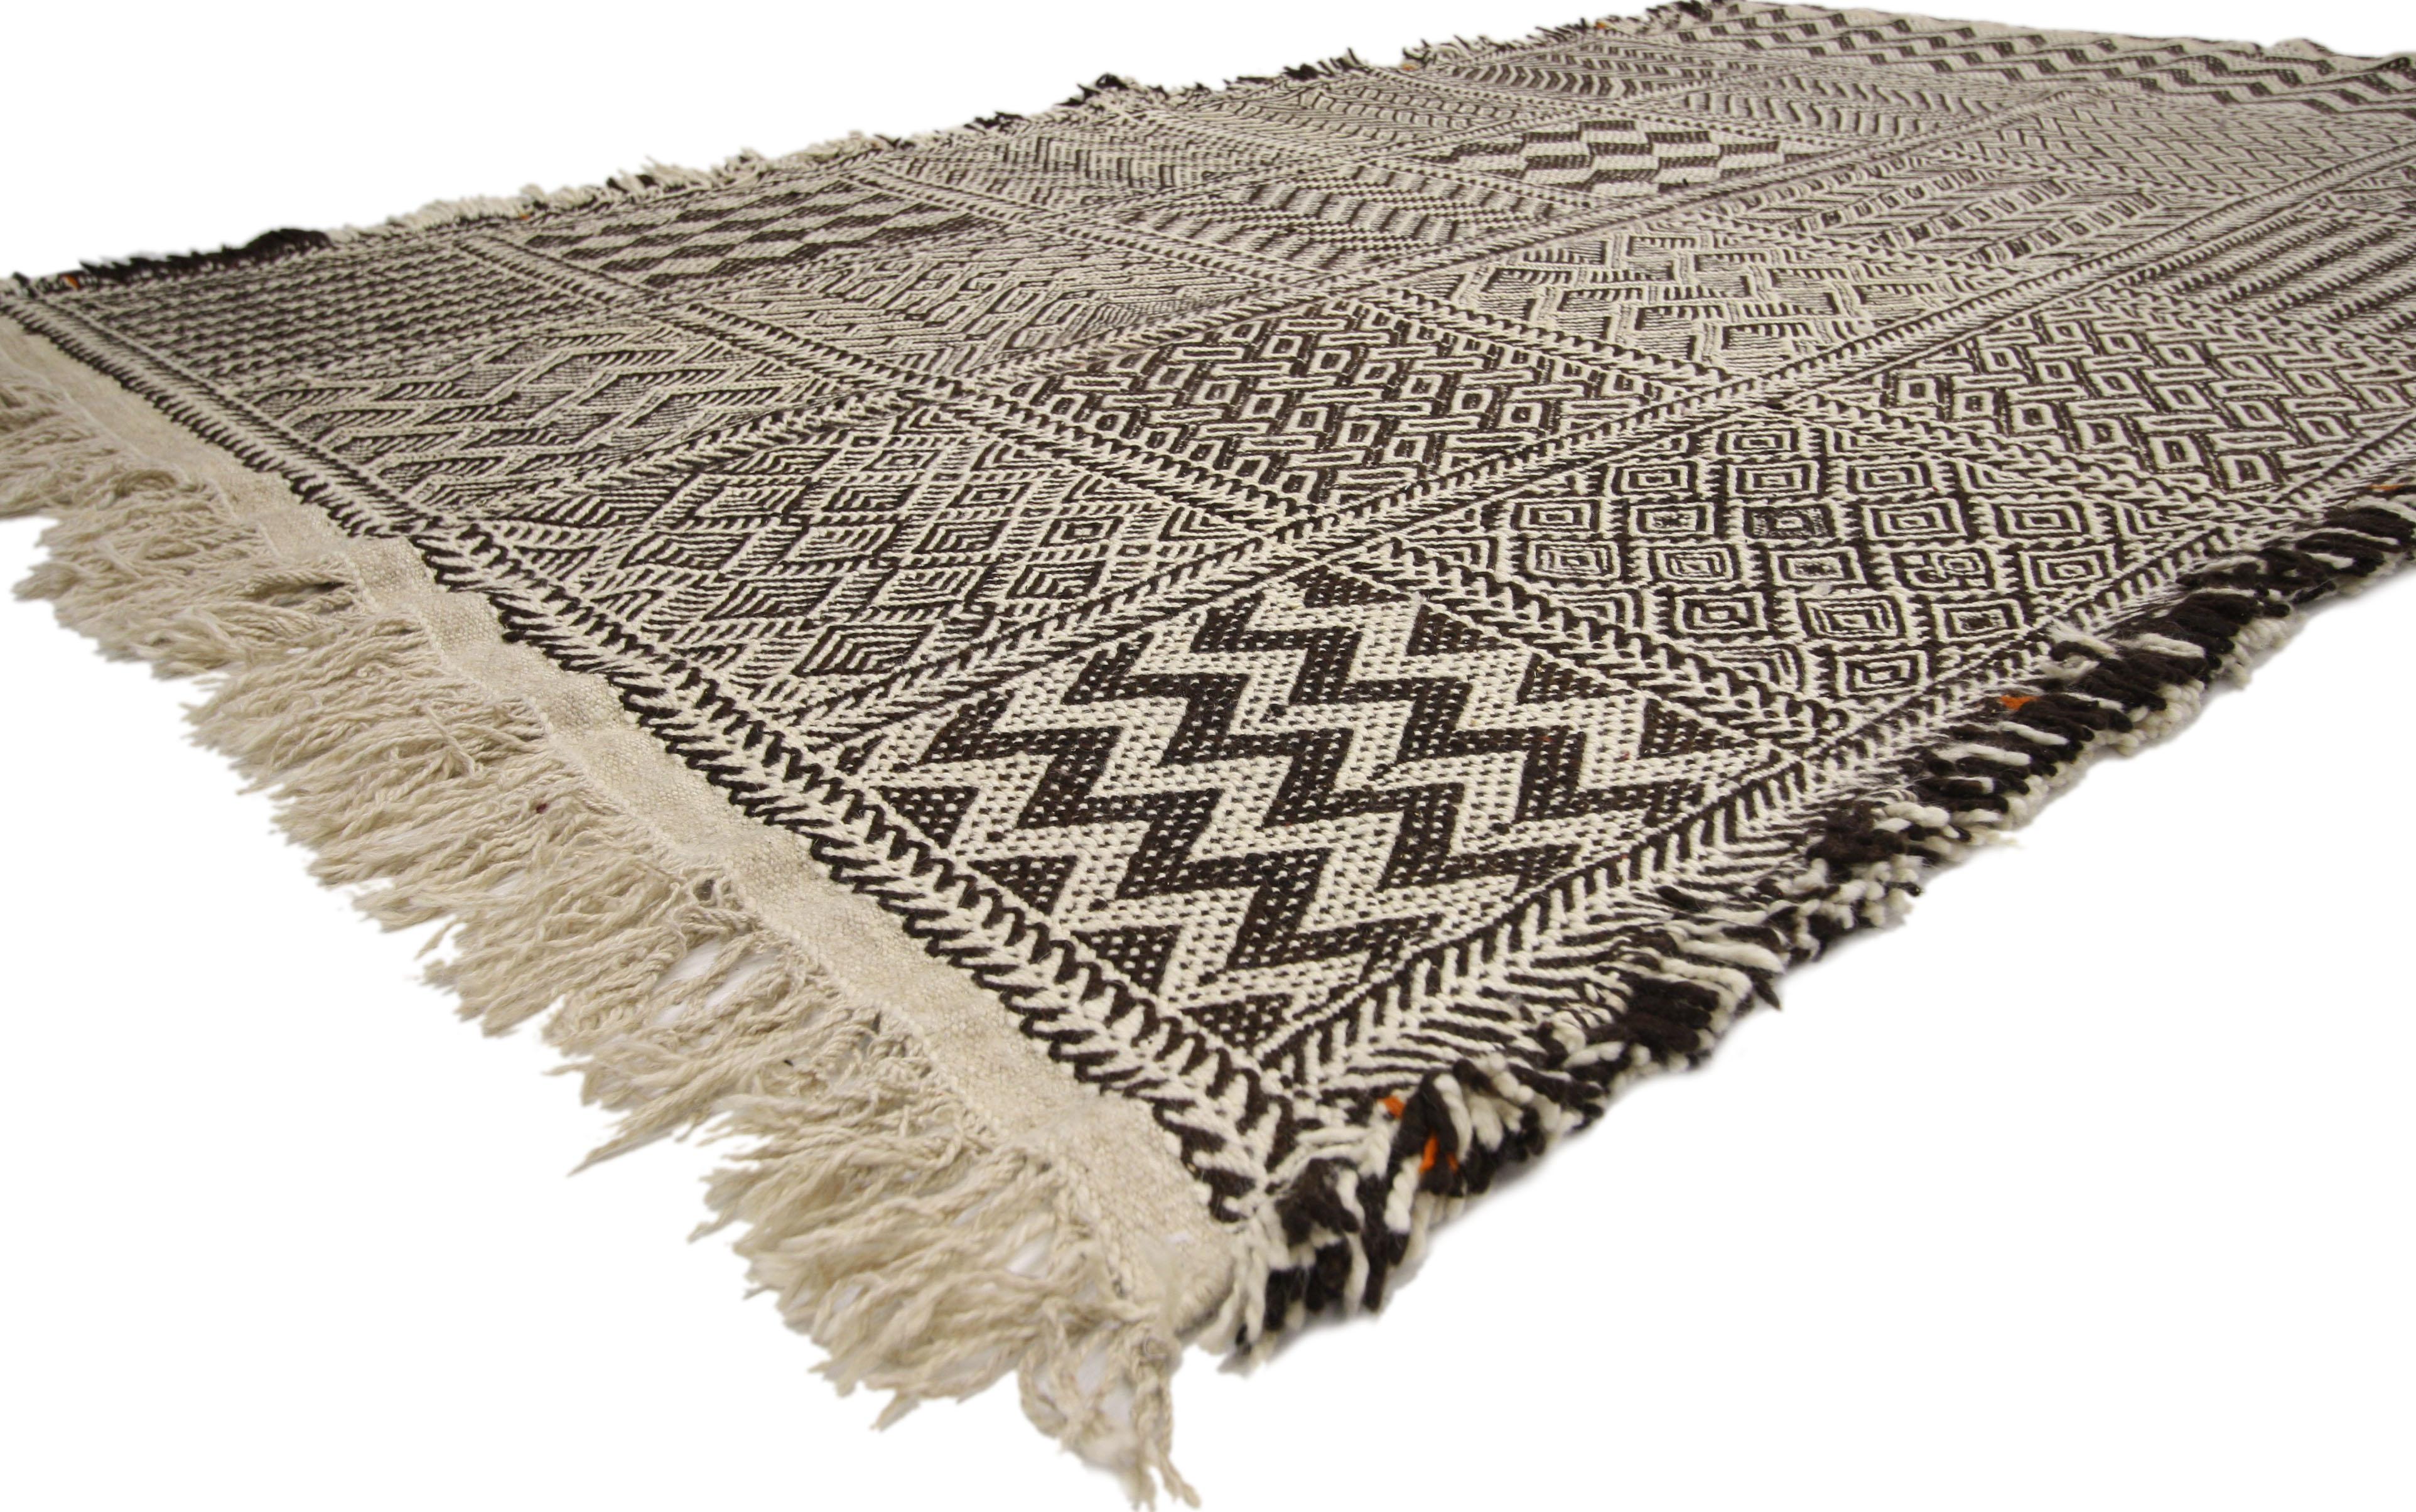 Hand-Knotted Vintage Zanafi Moroccan Kilim Rug with Zillij Style, Moroccan Tile Pattern Rug